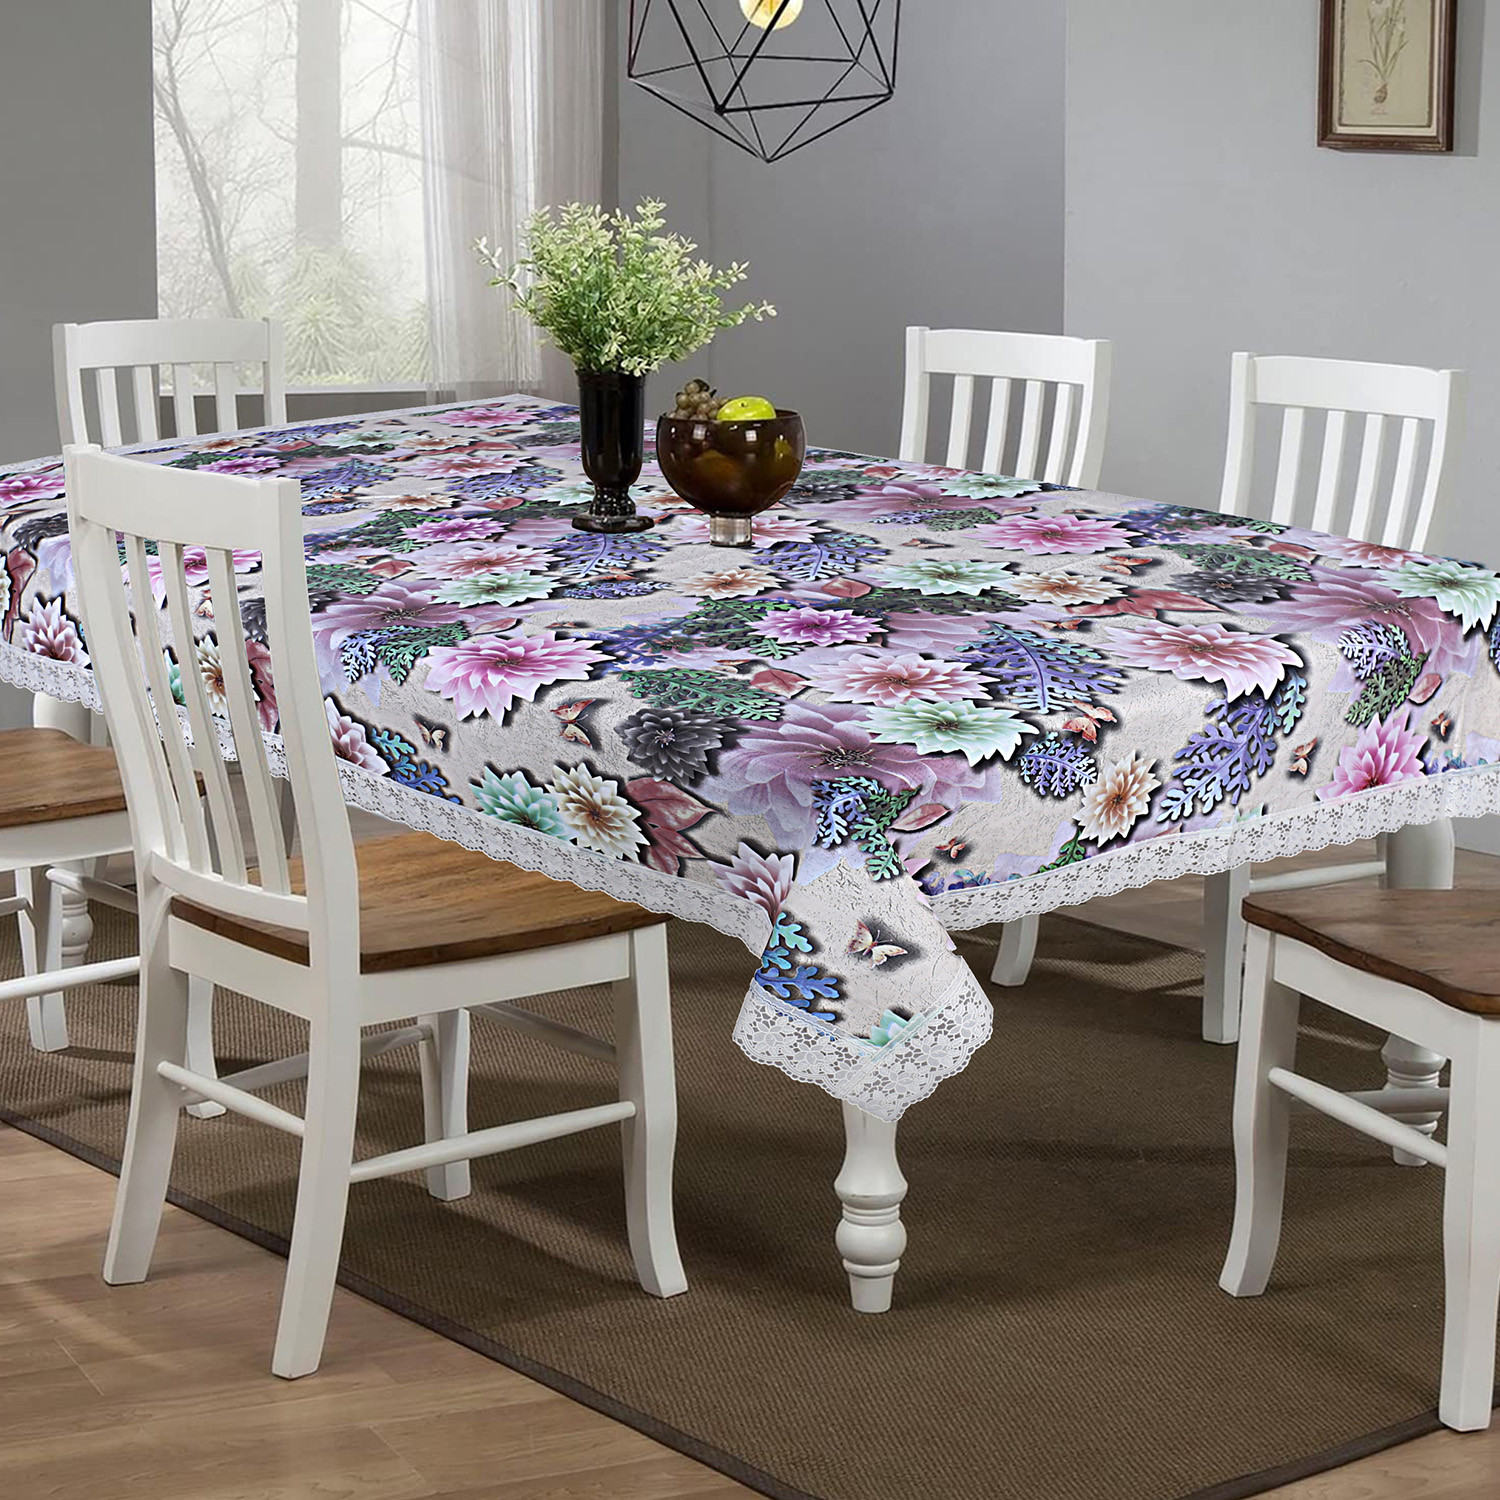 Kuber Industries Dining Table Cover|PVC Spill Proof Buterfly Pattern Tablecloth|Kitchen Dinning Protector With Seamless Border, 60X90 Inch (Brown)